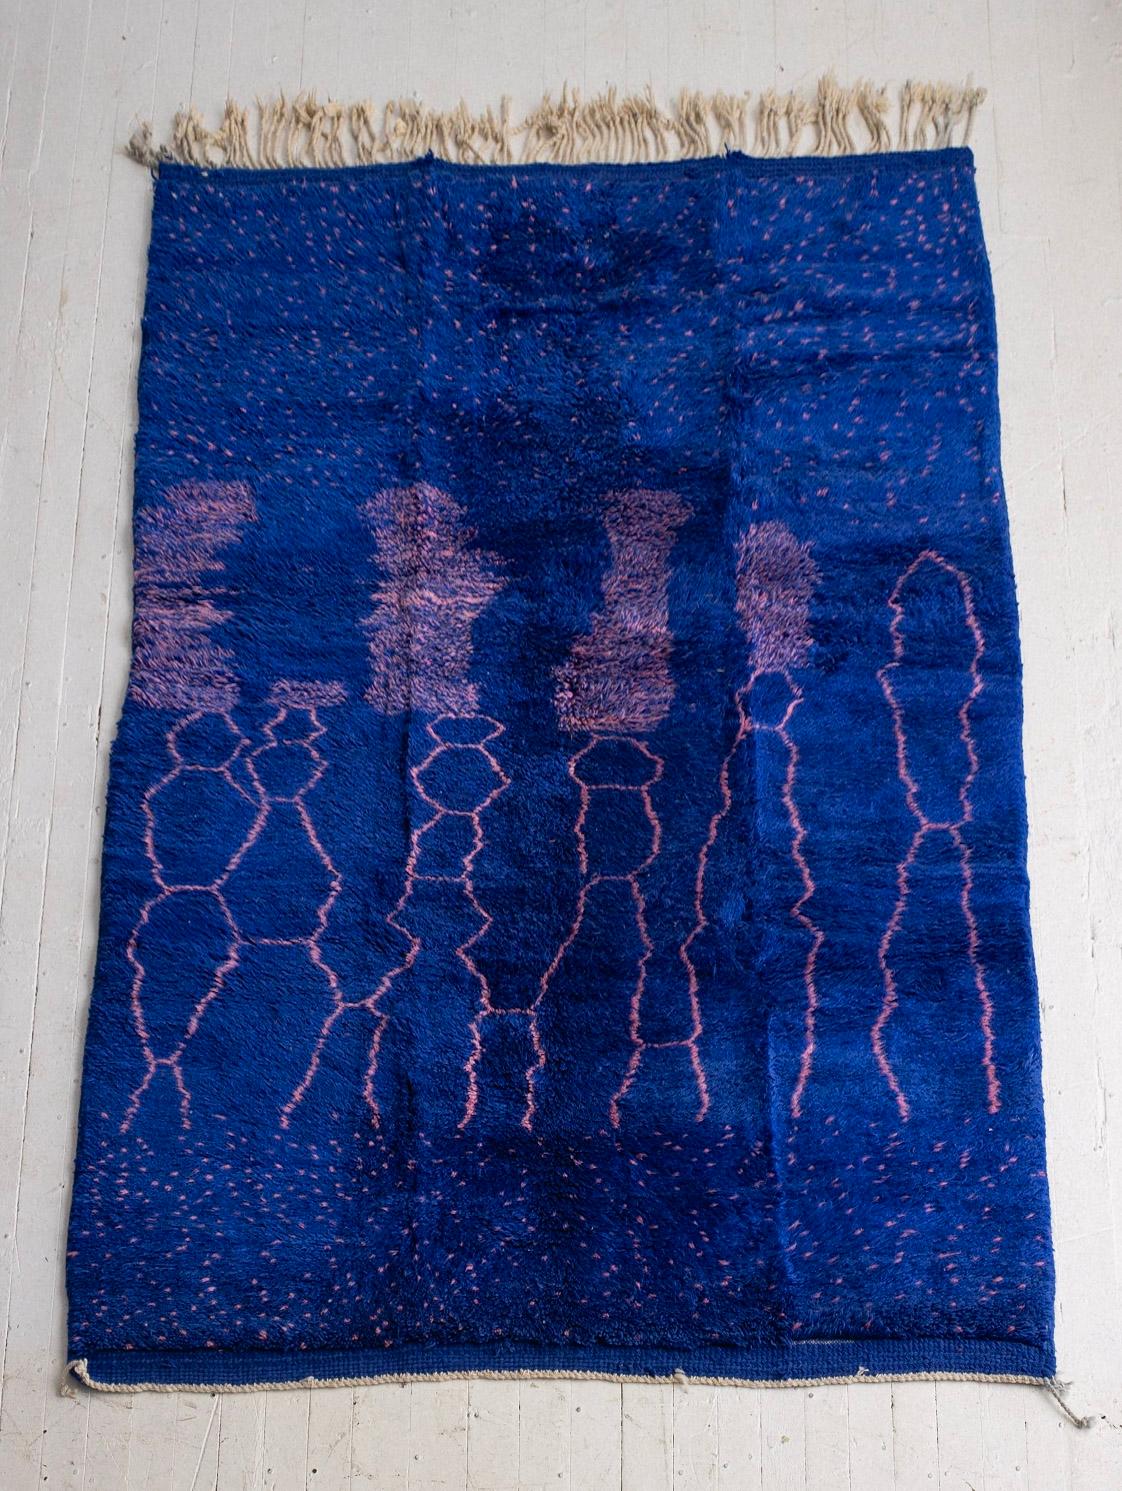 Hand knotted Moroccan wool rug. High pile shag. Graphic vibrant cobalt and pink pattern reminiscent of a night sky or evening landscape.